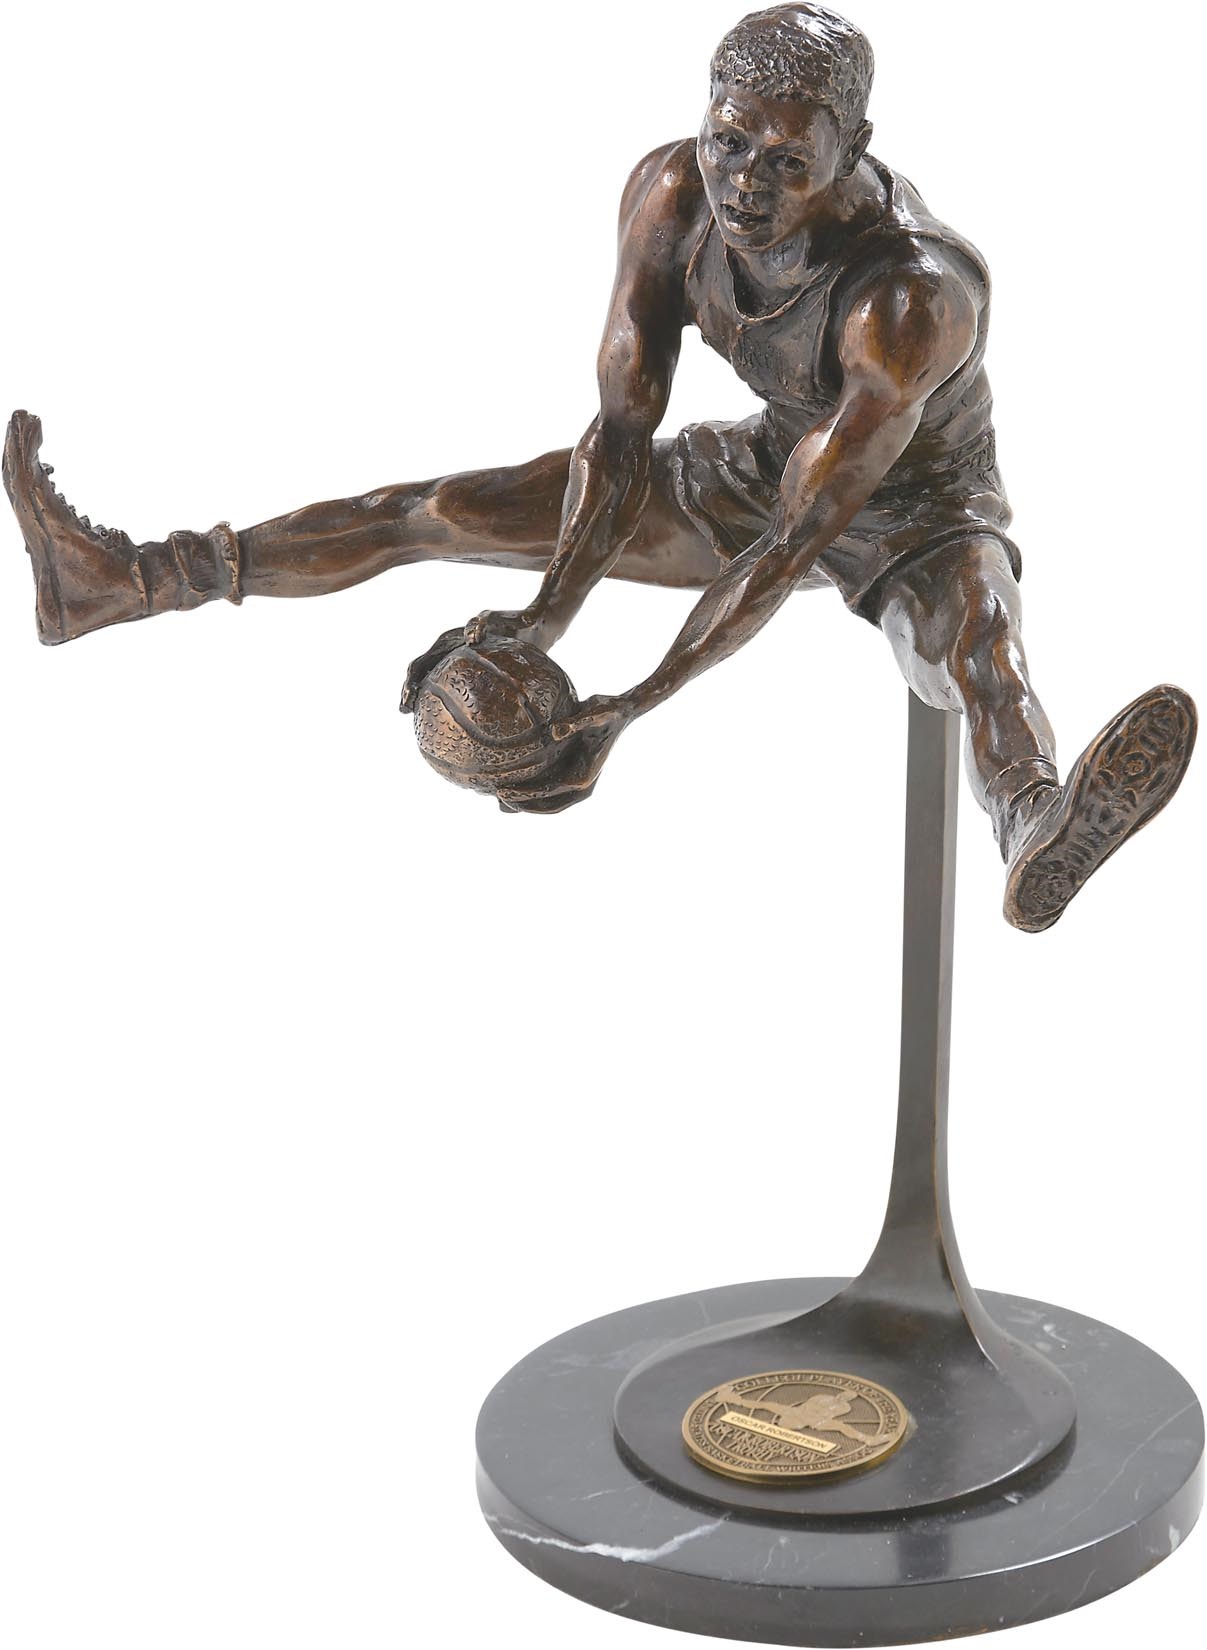 - Oscar Robertson College Player of the Year Trophy Presented to Oscar Robertson